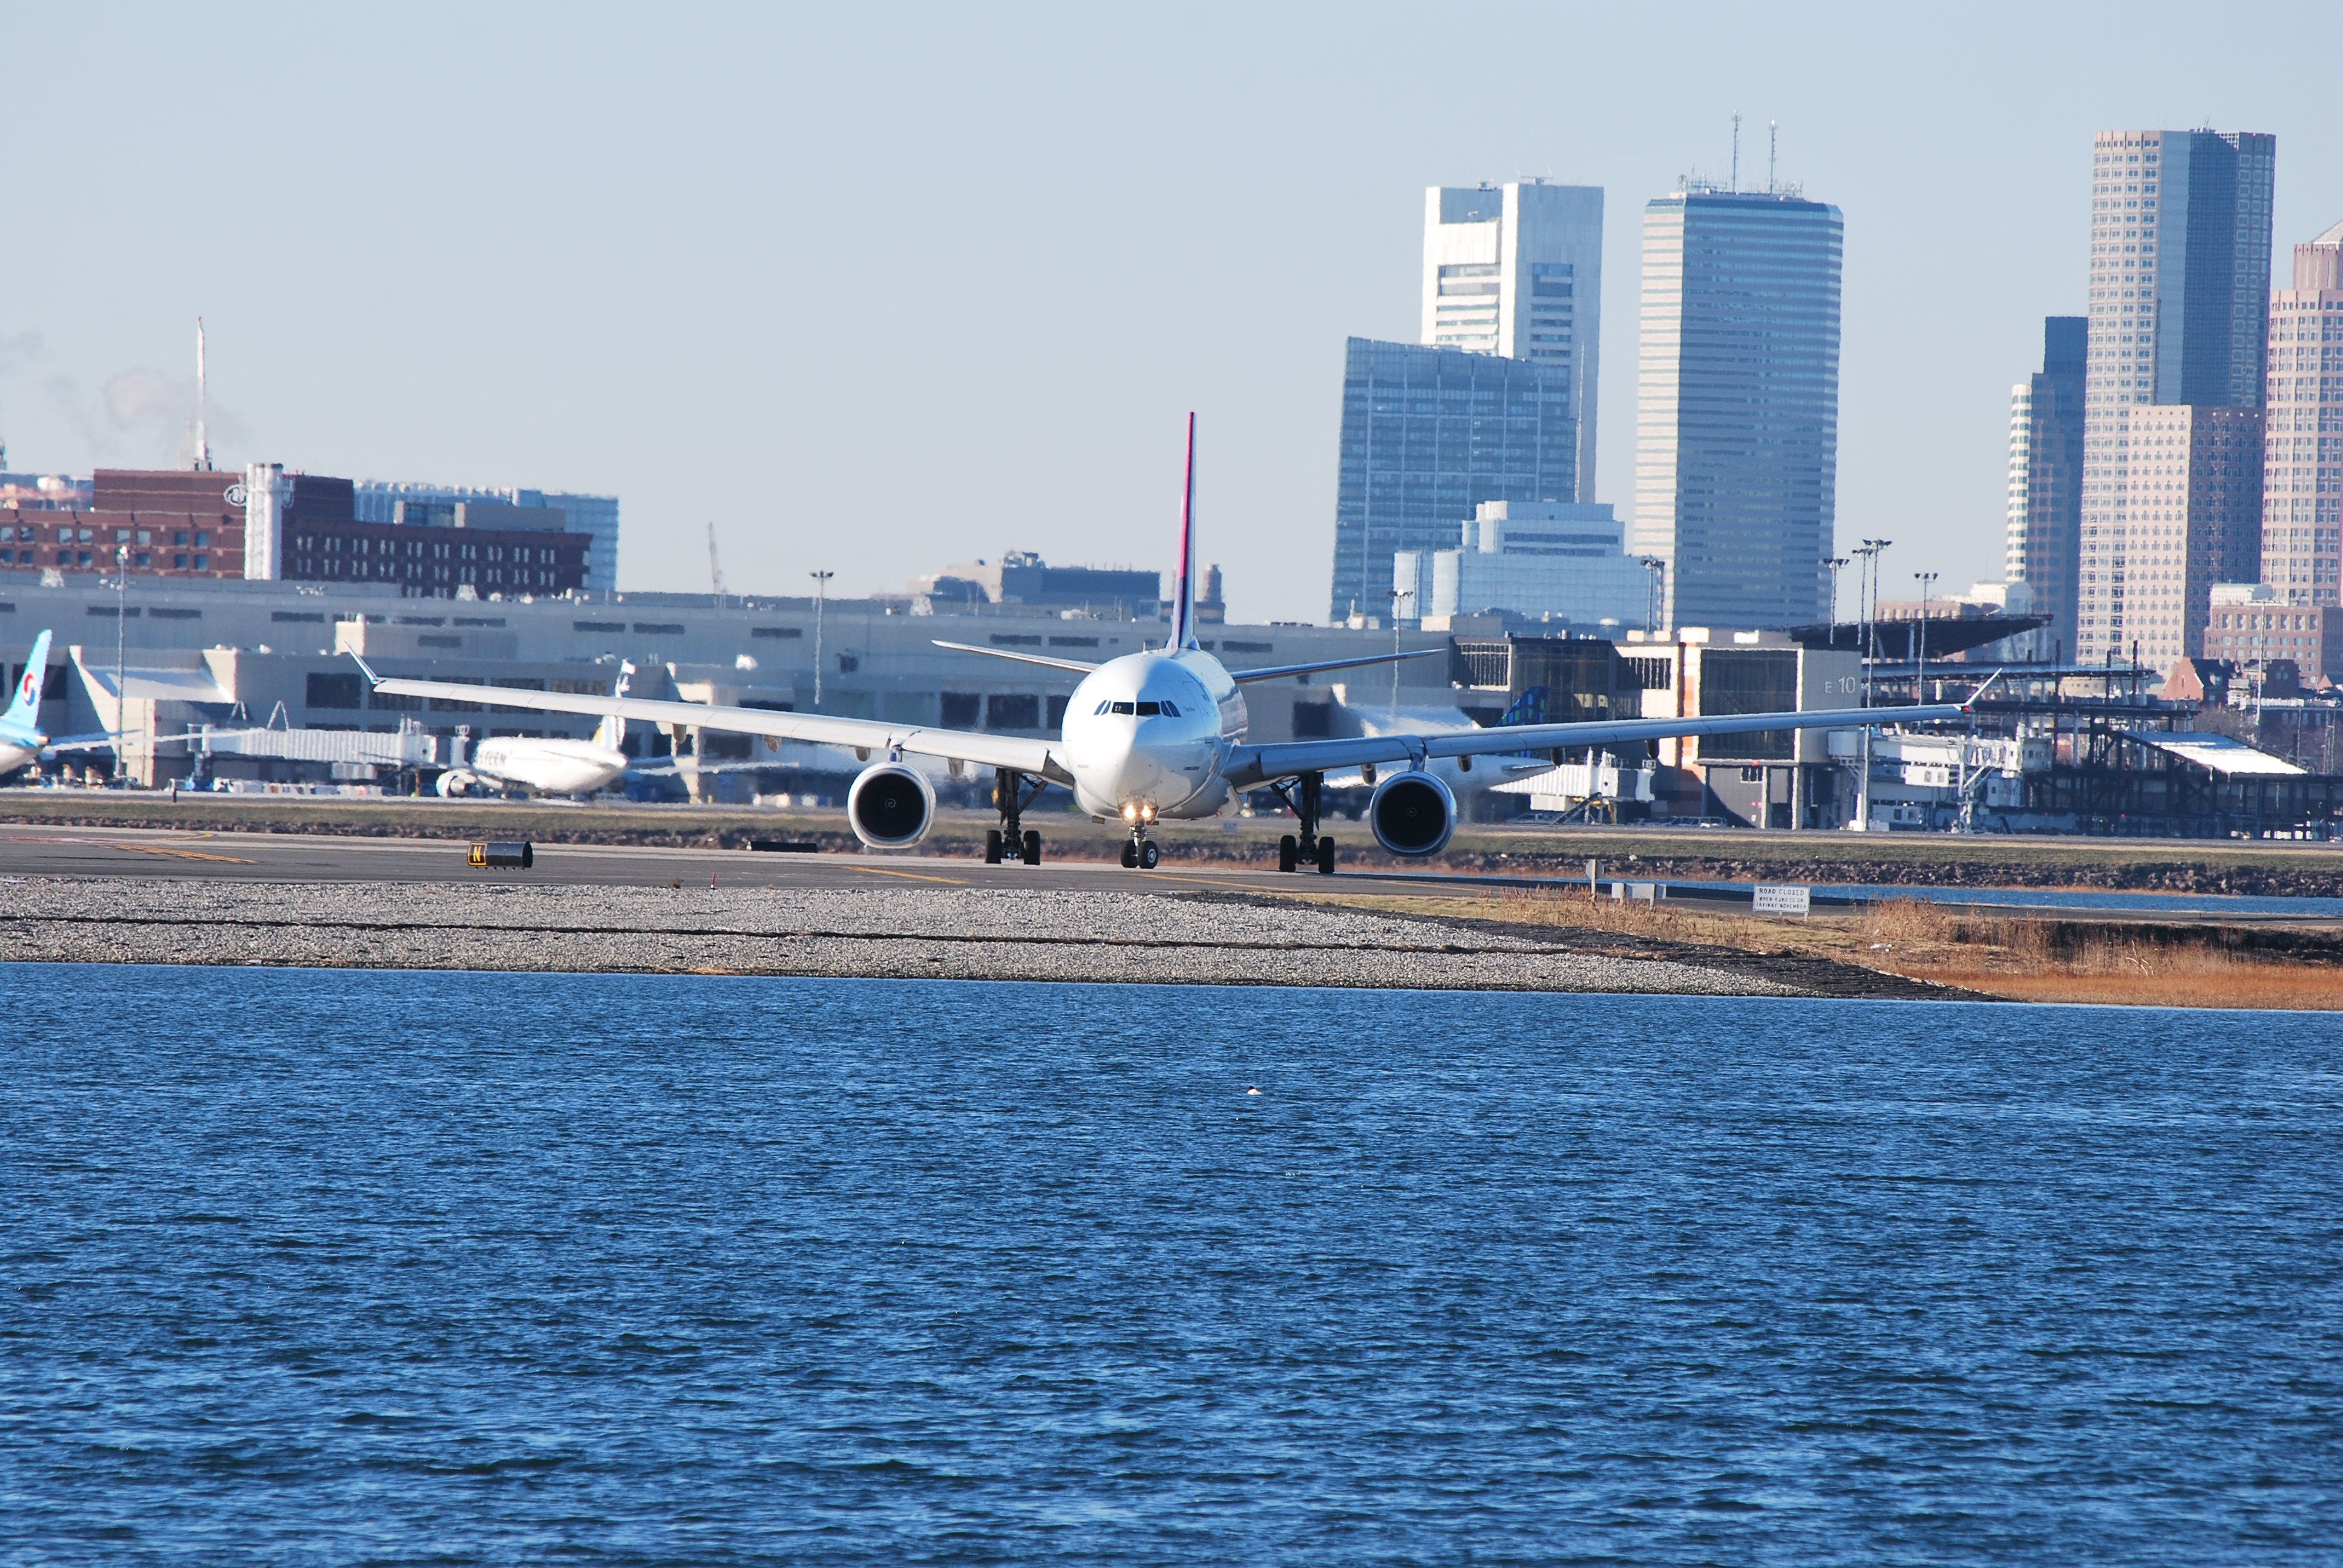 An airport on the apron at Kansai Airport.